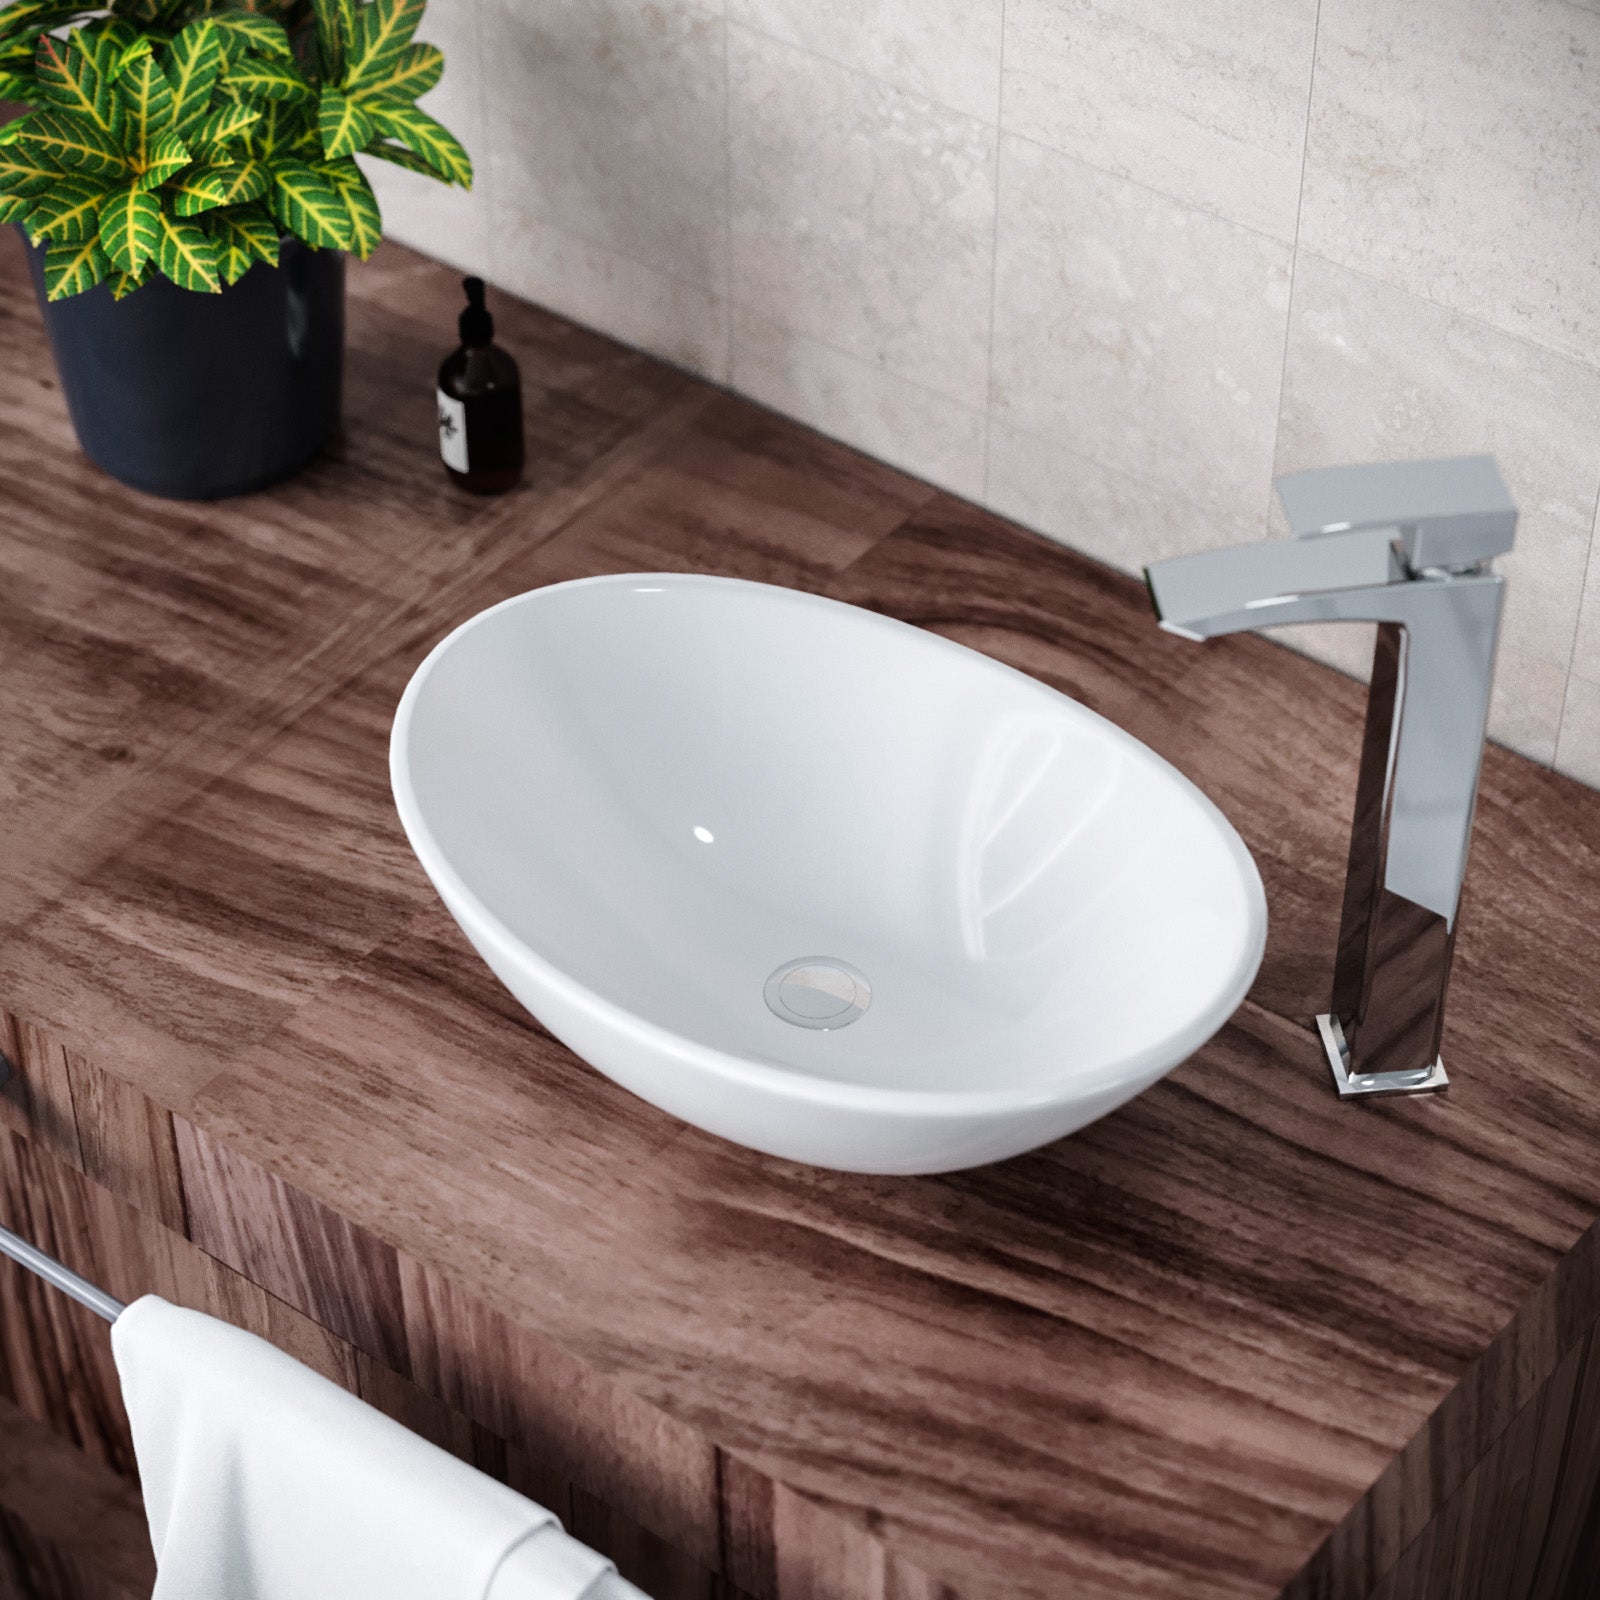 Etive 410 X 335mm Oval Cloakroom Counter Top Basin Sink Bowl